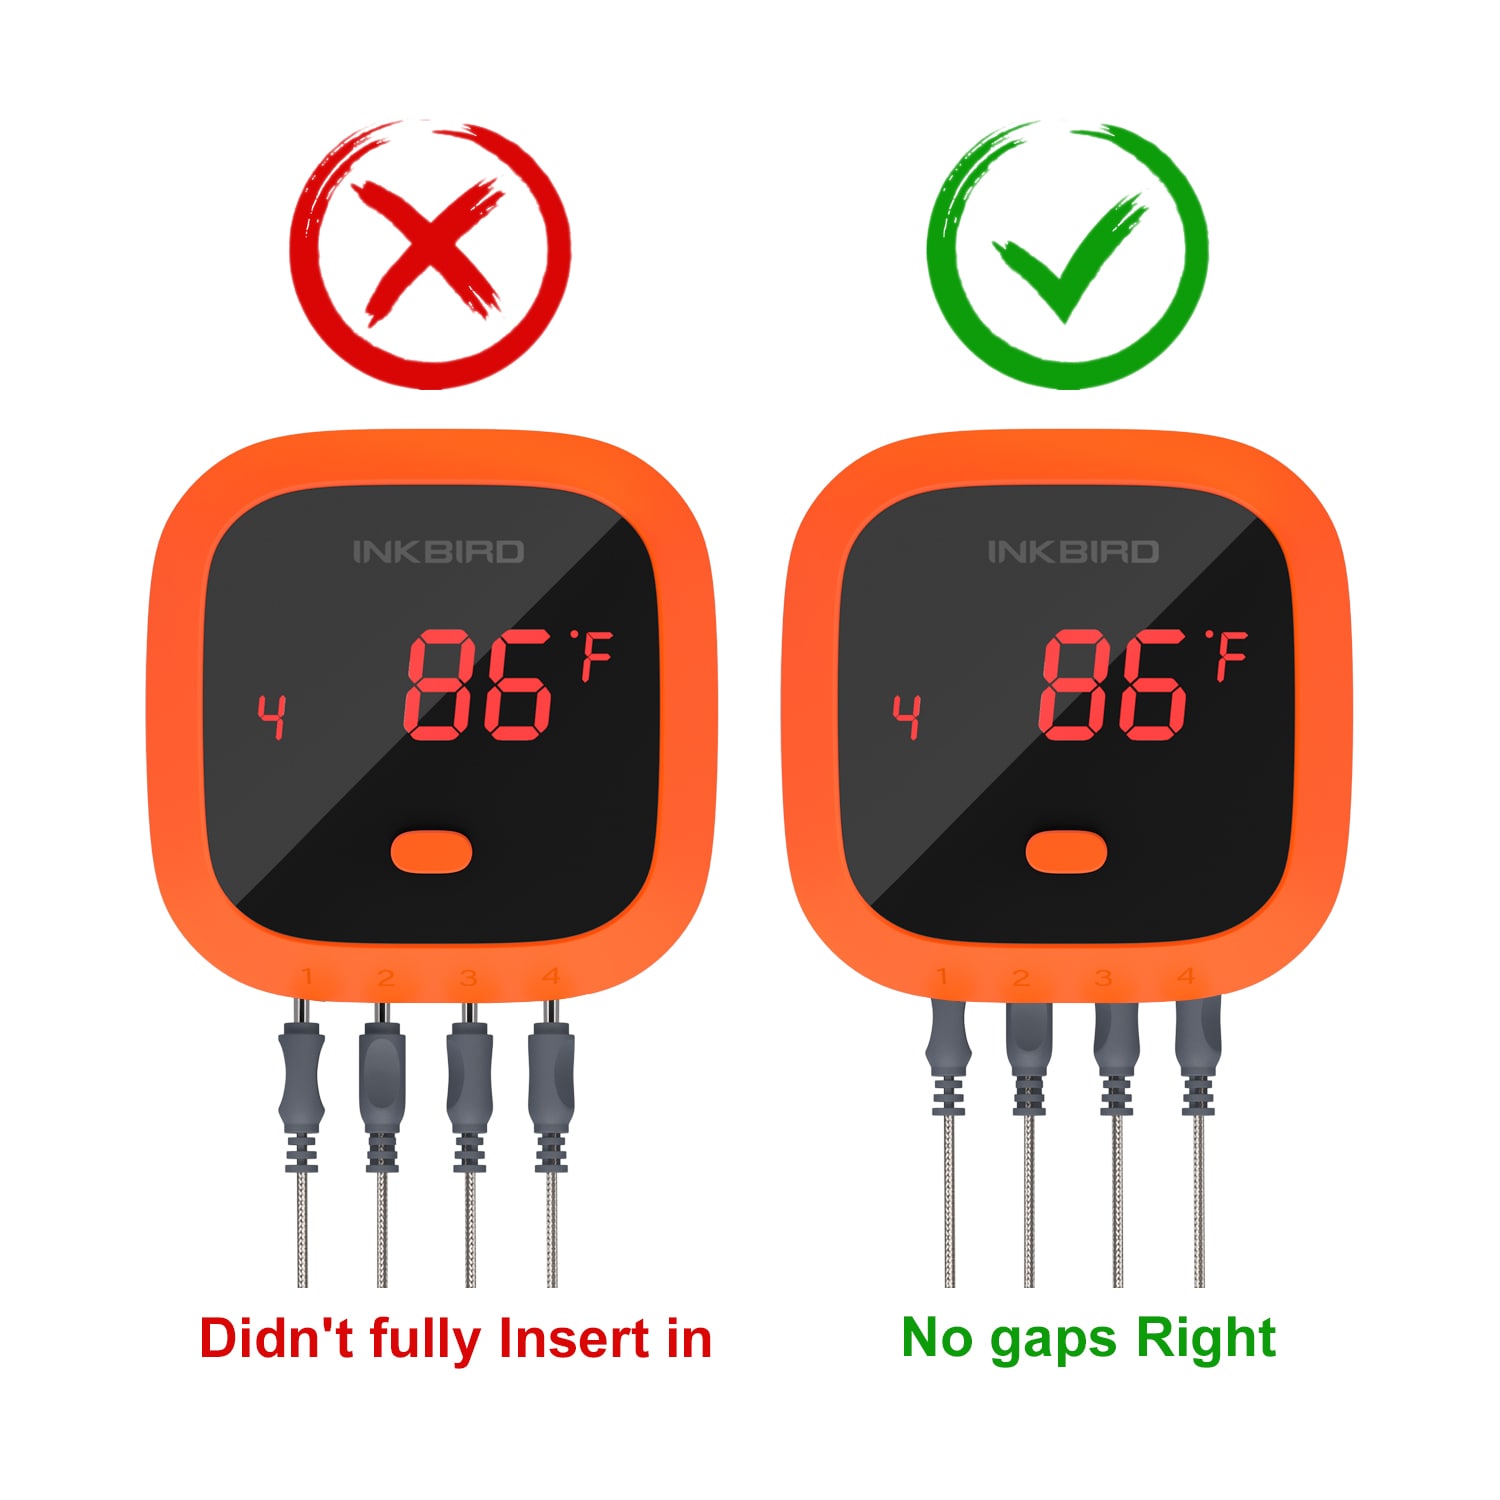 Inkbird Wireless Meat Thermometer, 4 Probes Bluetooth Meat Thermometers for Grilling  Smoking Smart Timer LCD Backlight Cooking Thermometer for Oven Outside BBQ  Grill Smoker Accessories Gifts for Men